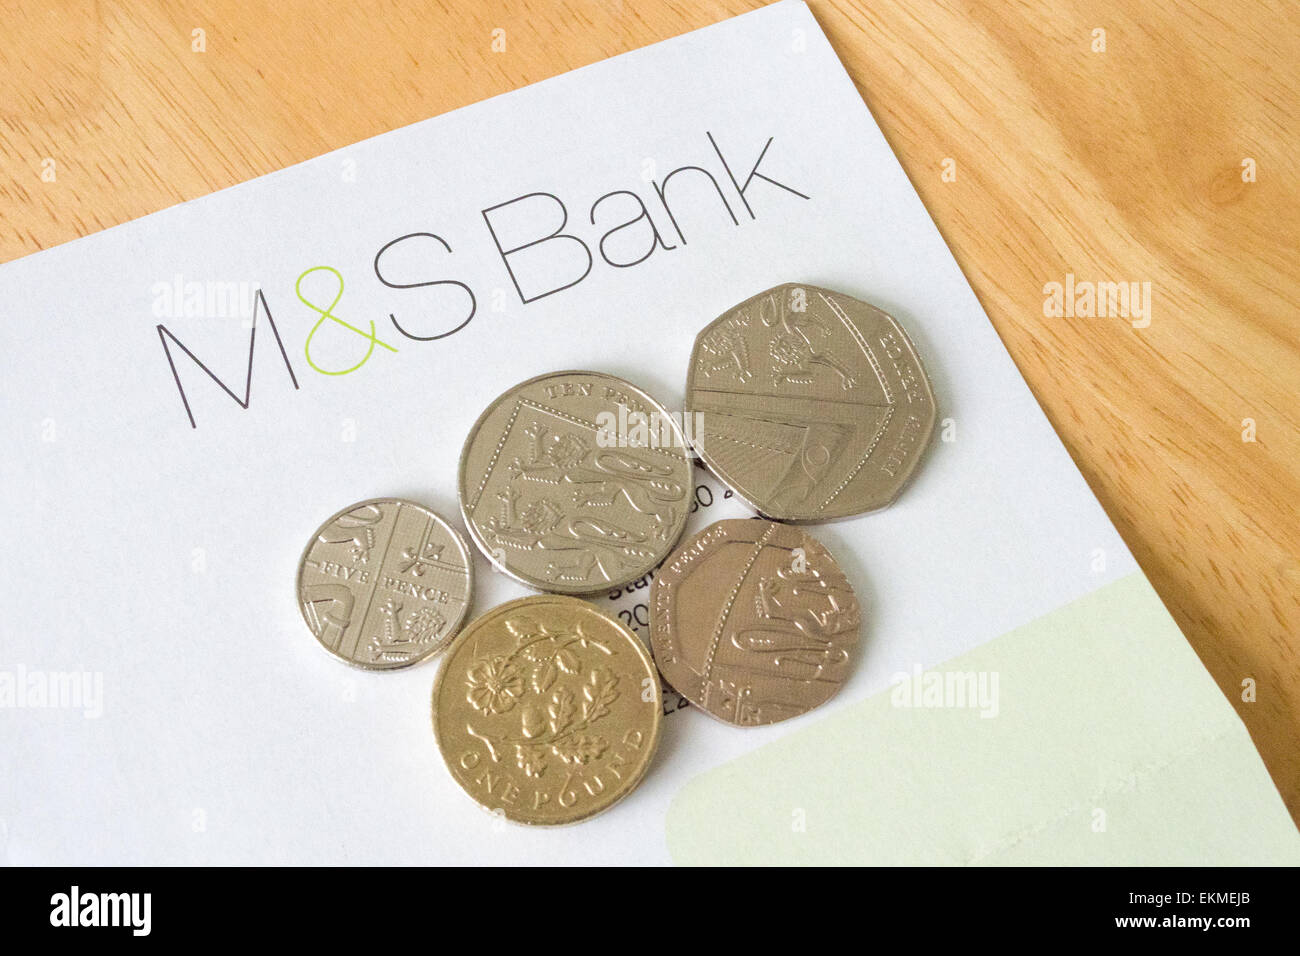 M&S Credit Card Statement On A Wooden Table, UK Stock Photo